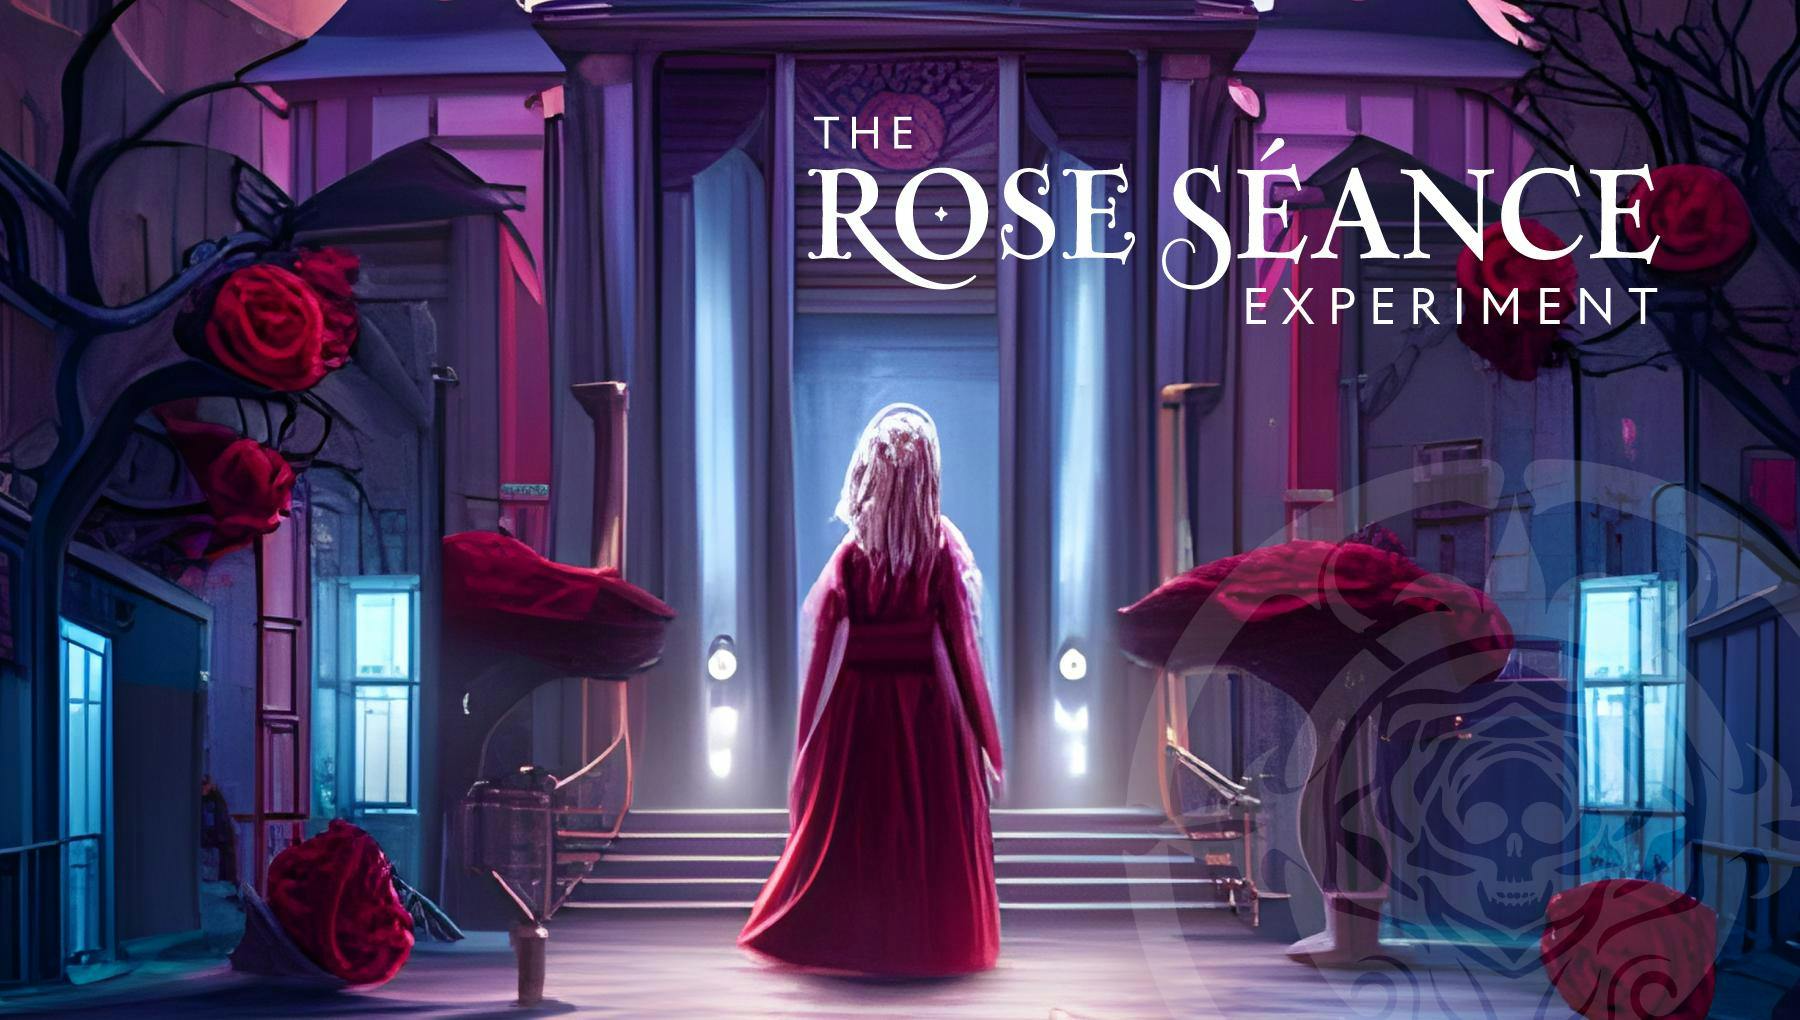 The Rose Seance Experiment